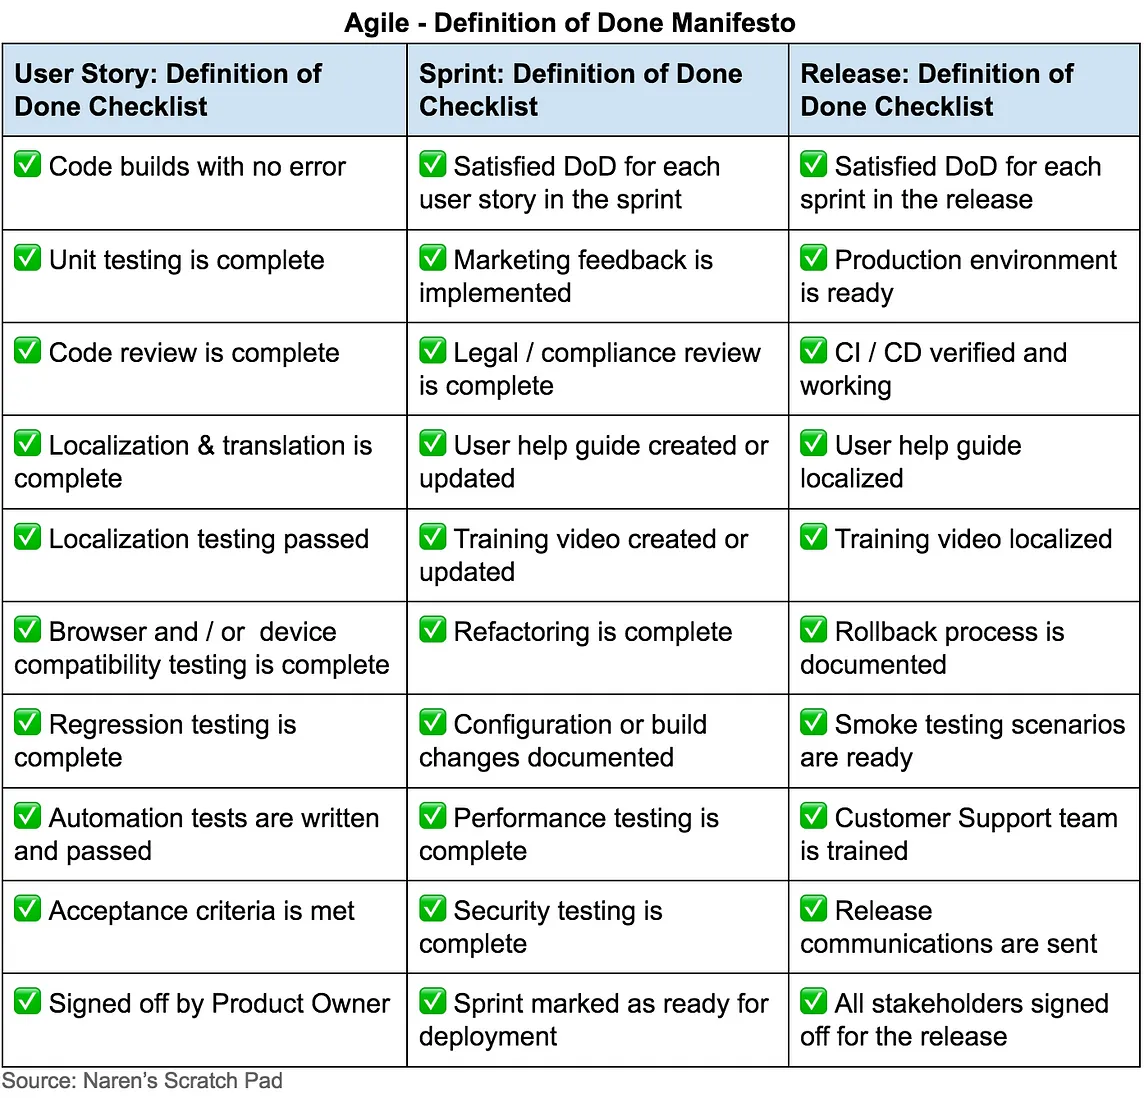 Agile: Definition of Done Checklist for User Story, Sprint and Release